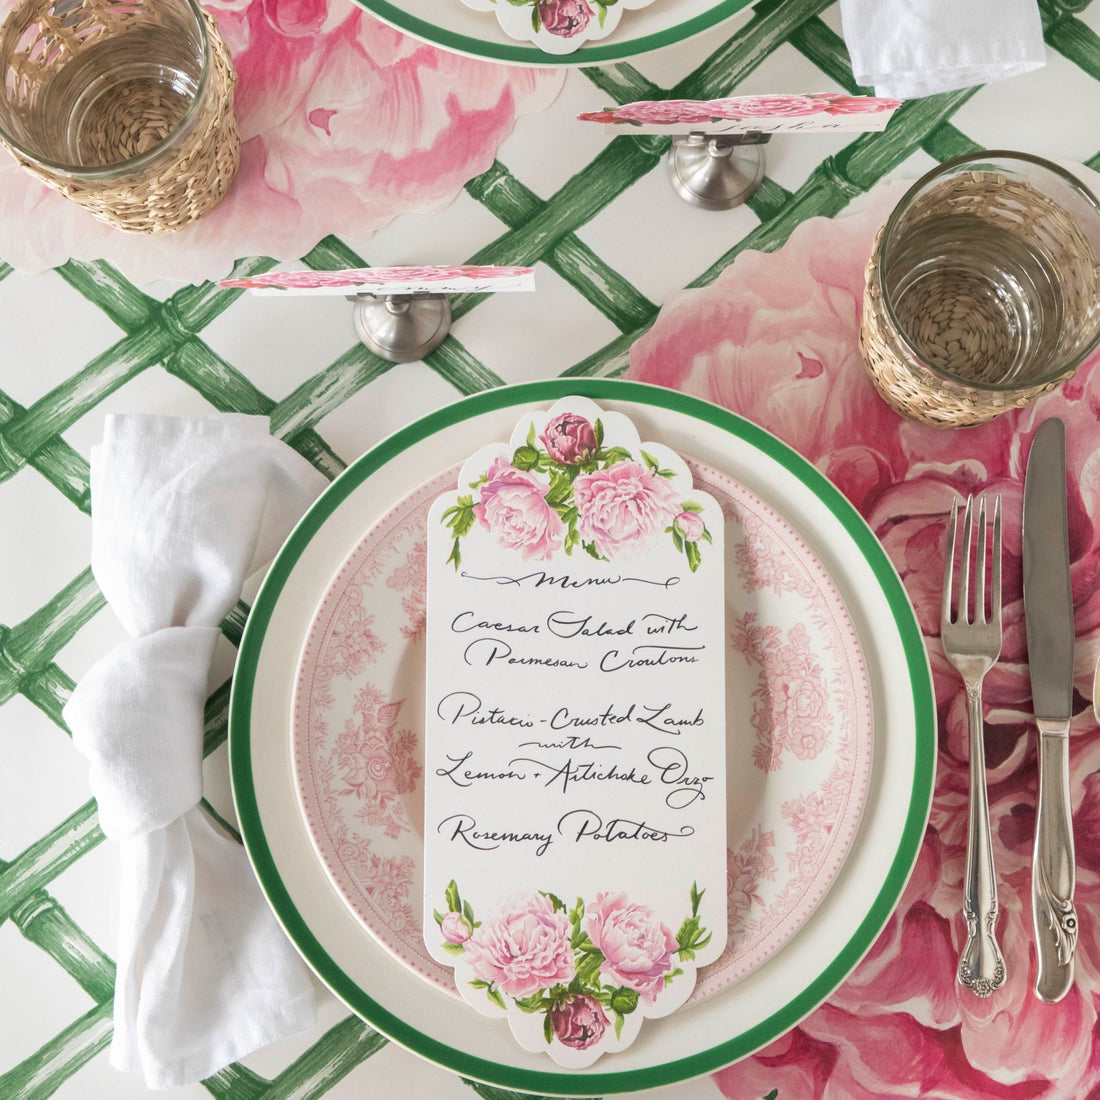 Top-down view of an elegant floral place setting featuring a Peony Table Card with a menu written on it resting on the plate.